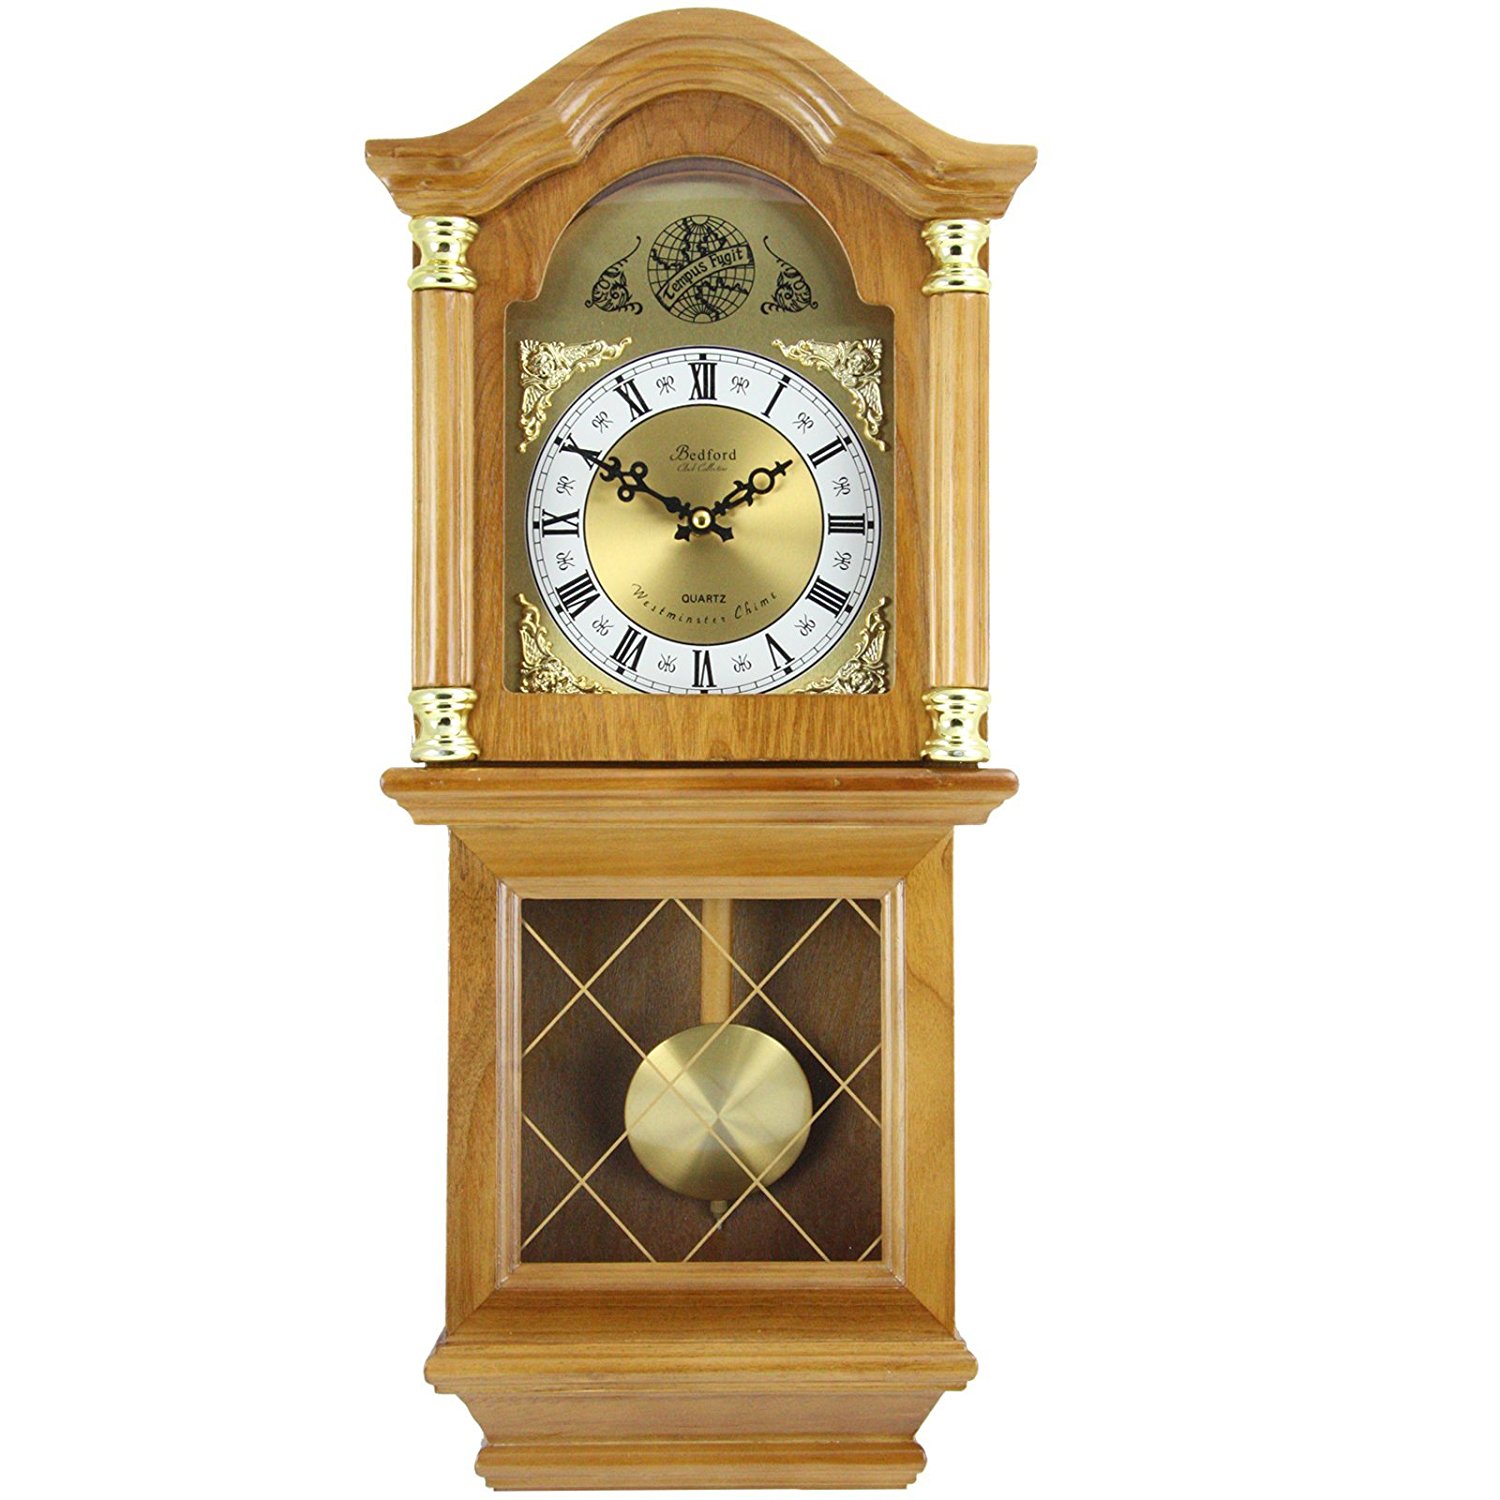 Bedford Clock Collection Classic Chiming Wall Clock With Swinging Pendulum, Golden Oak